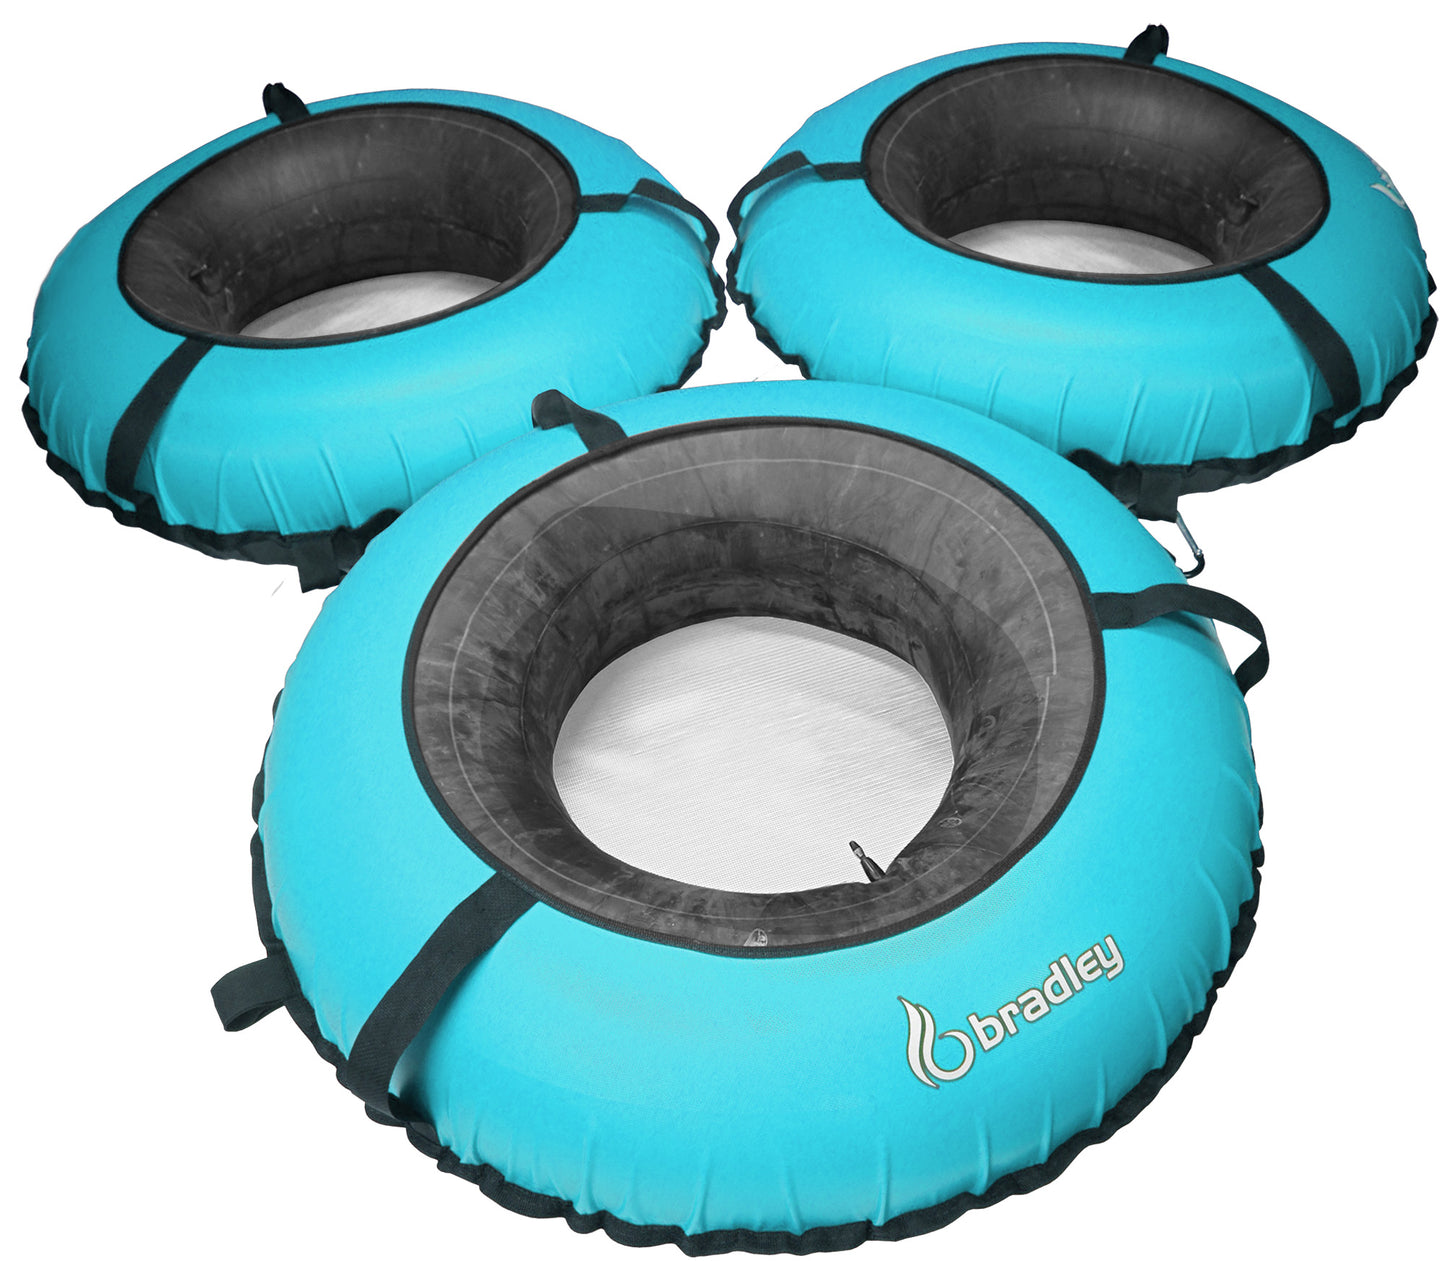 Pack of three Bradley heavy duty tubes for floating the river; Whitewater water tube; Rubber inner tube with cover for river floating; Linking river tubes for floating the river; river raft tubes